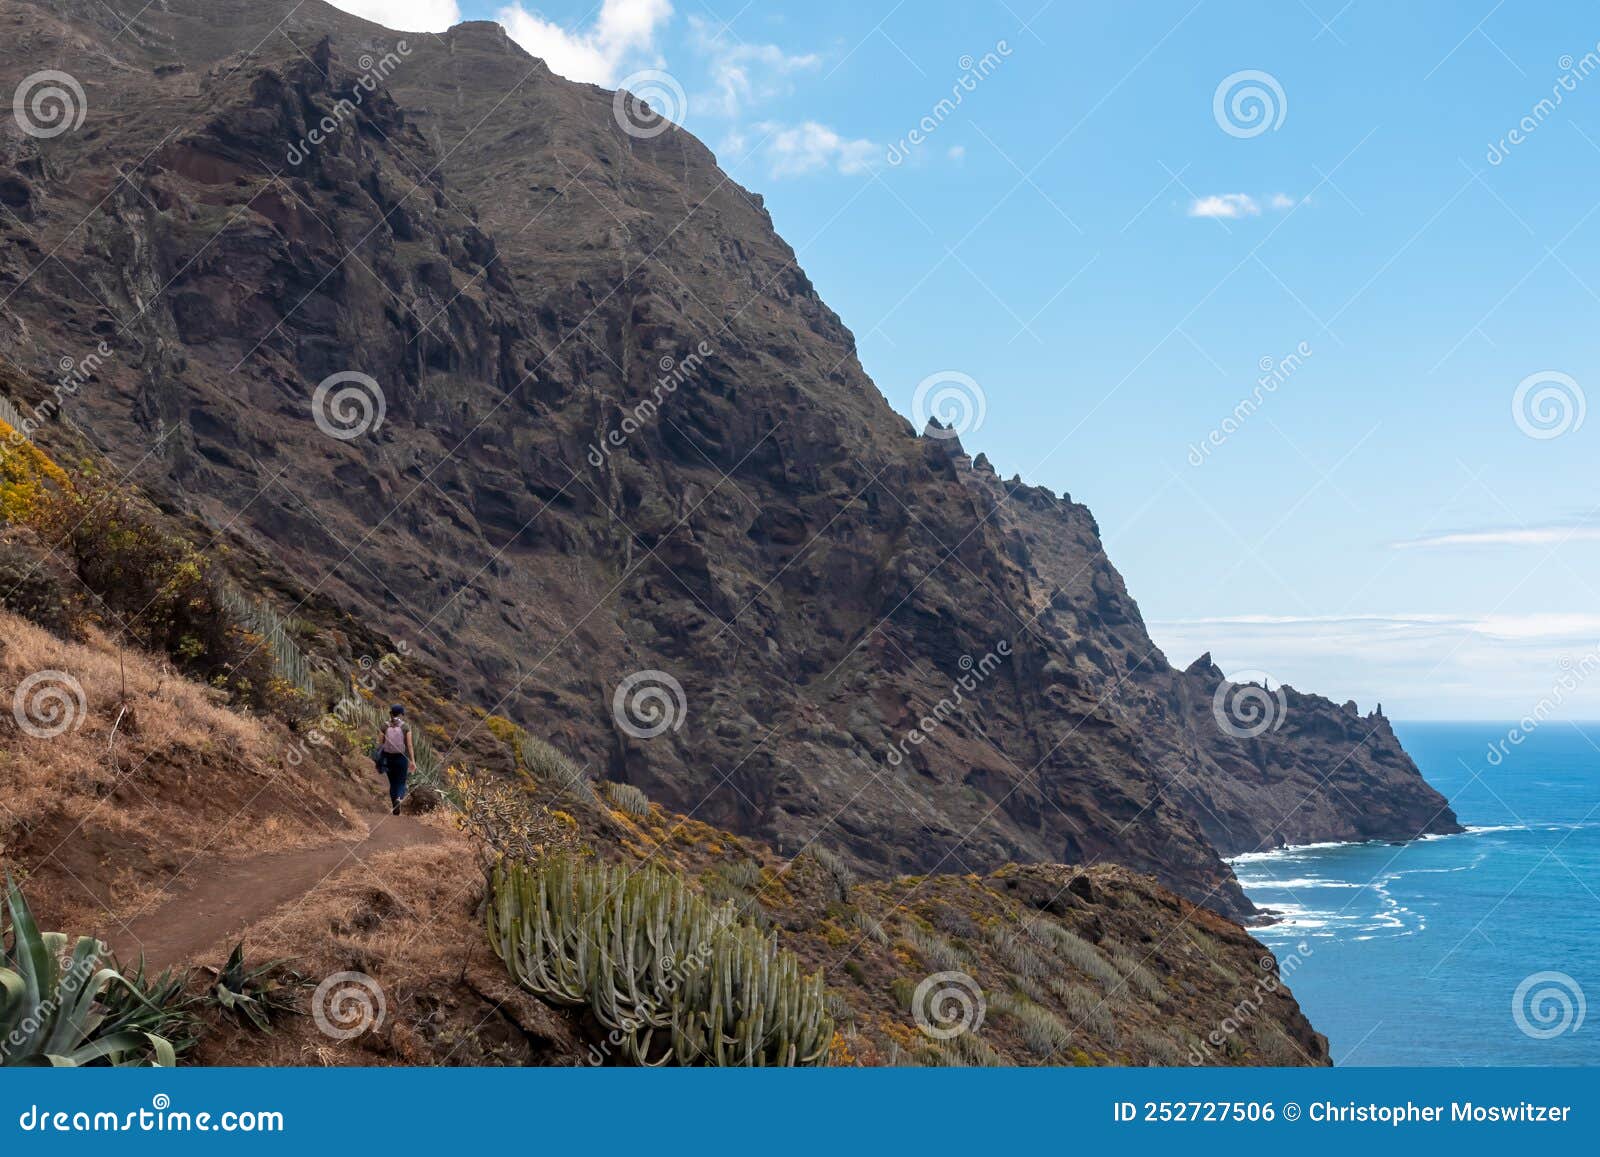 hiking woman with scenic view of coastline of anaga mountain range on tenerife, canary islands, spain. view on cabezo el tablero